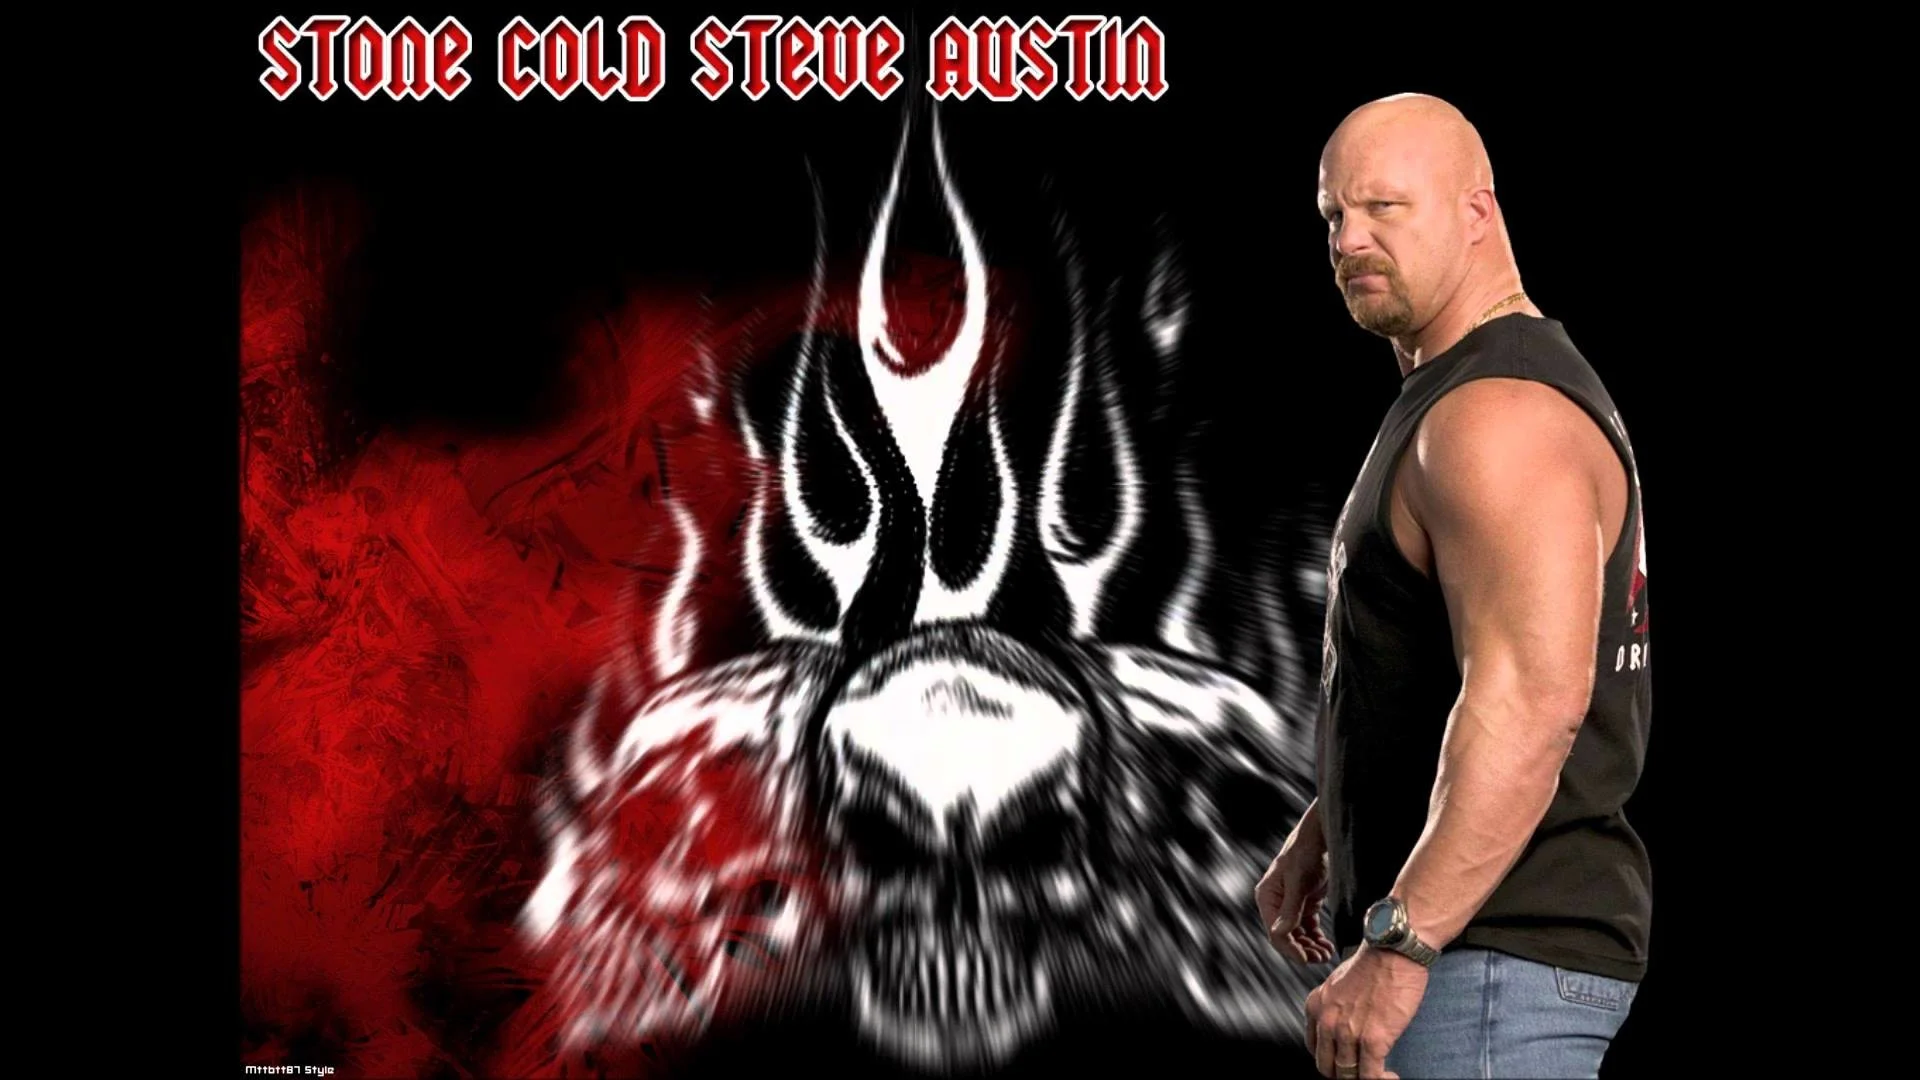 HD Stone Cold Steve Austin 3rd Theme Song – Glass Shatters with Download Link